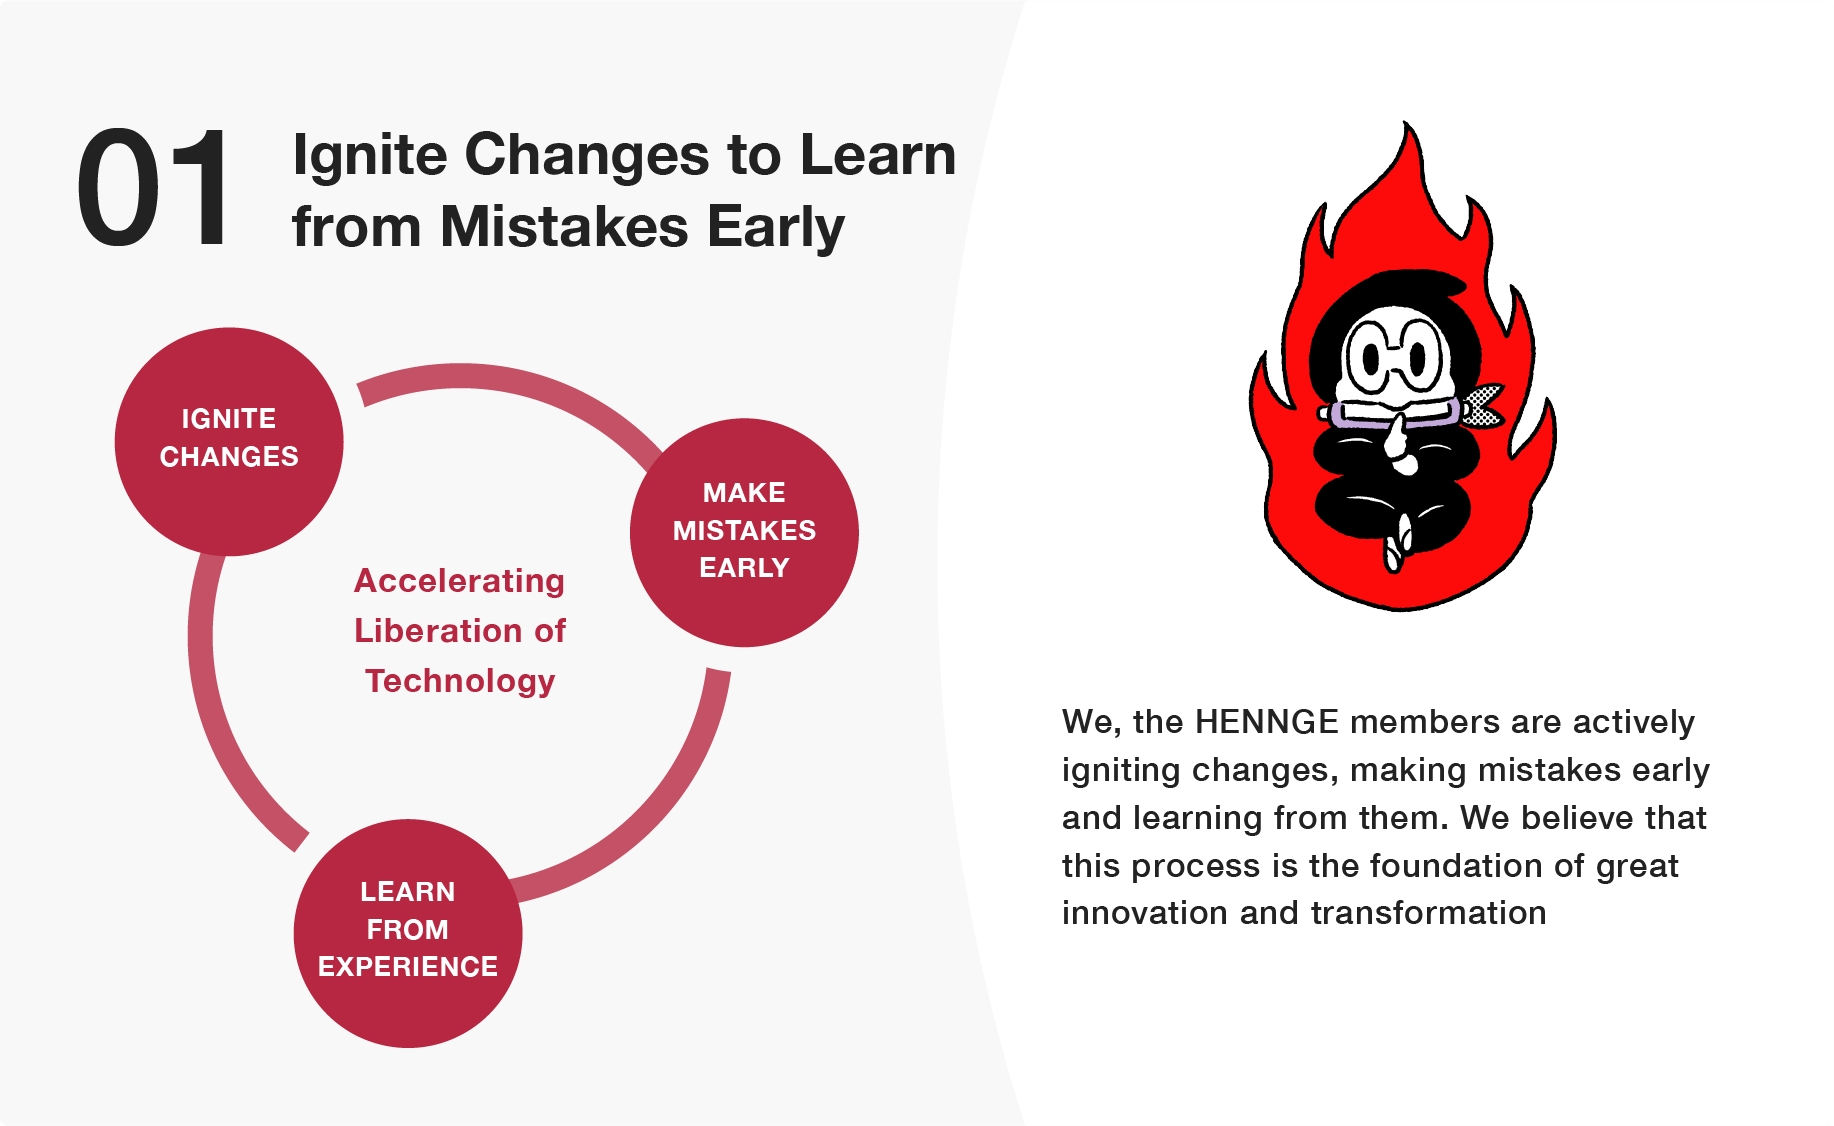 01 IGNITE CHANGES TO LEARN FROM MISTAKES EARLY